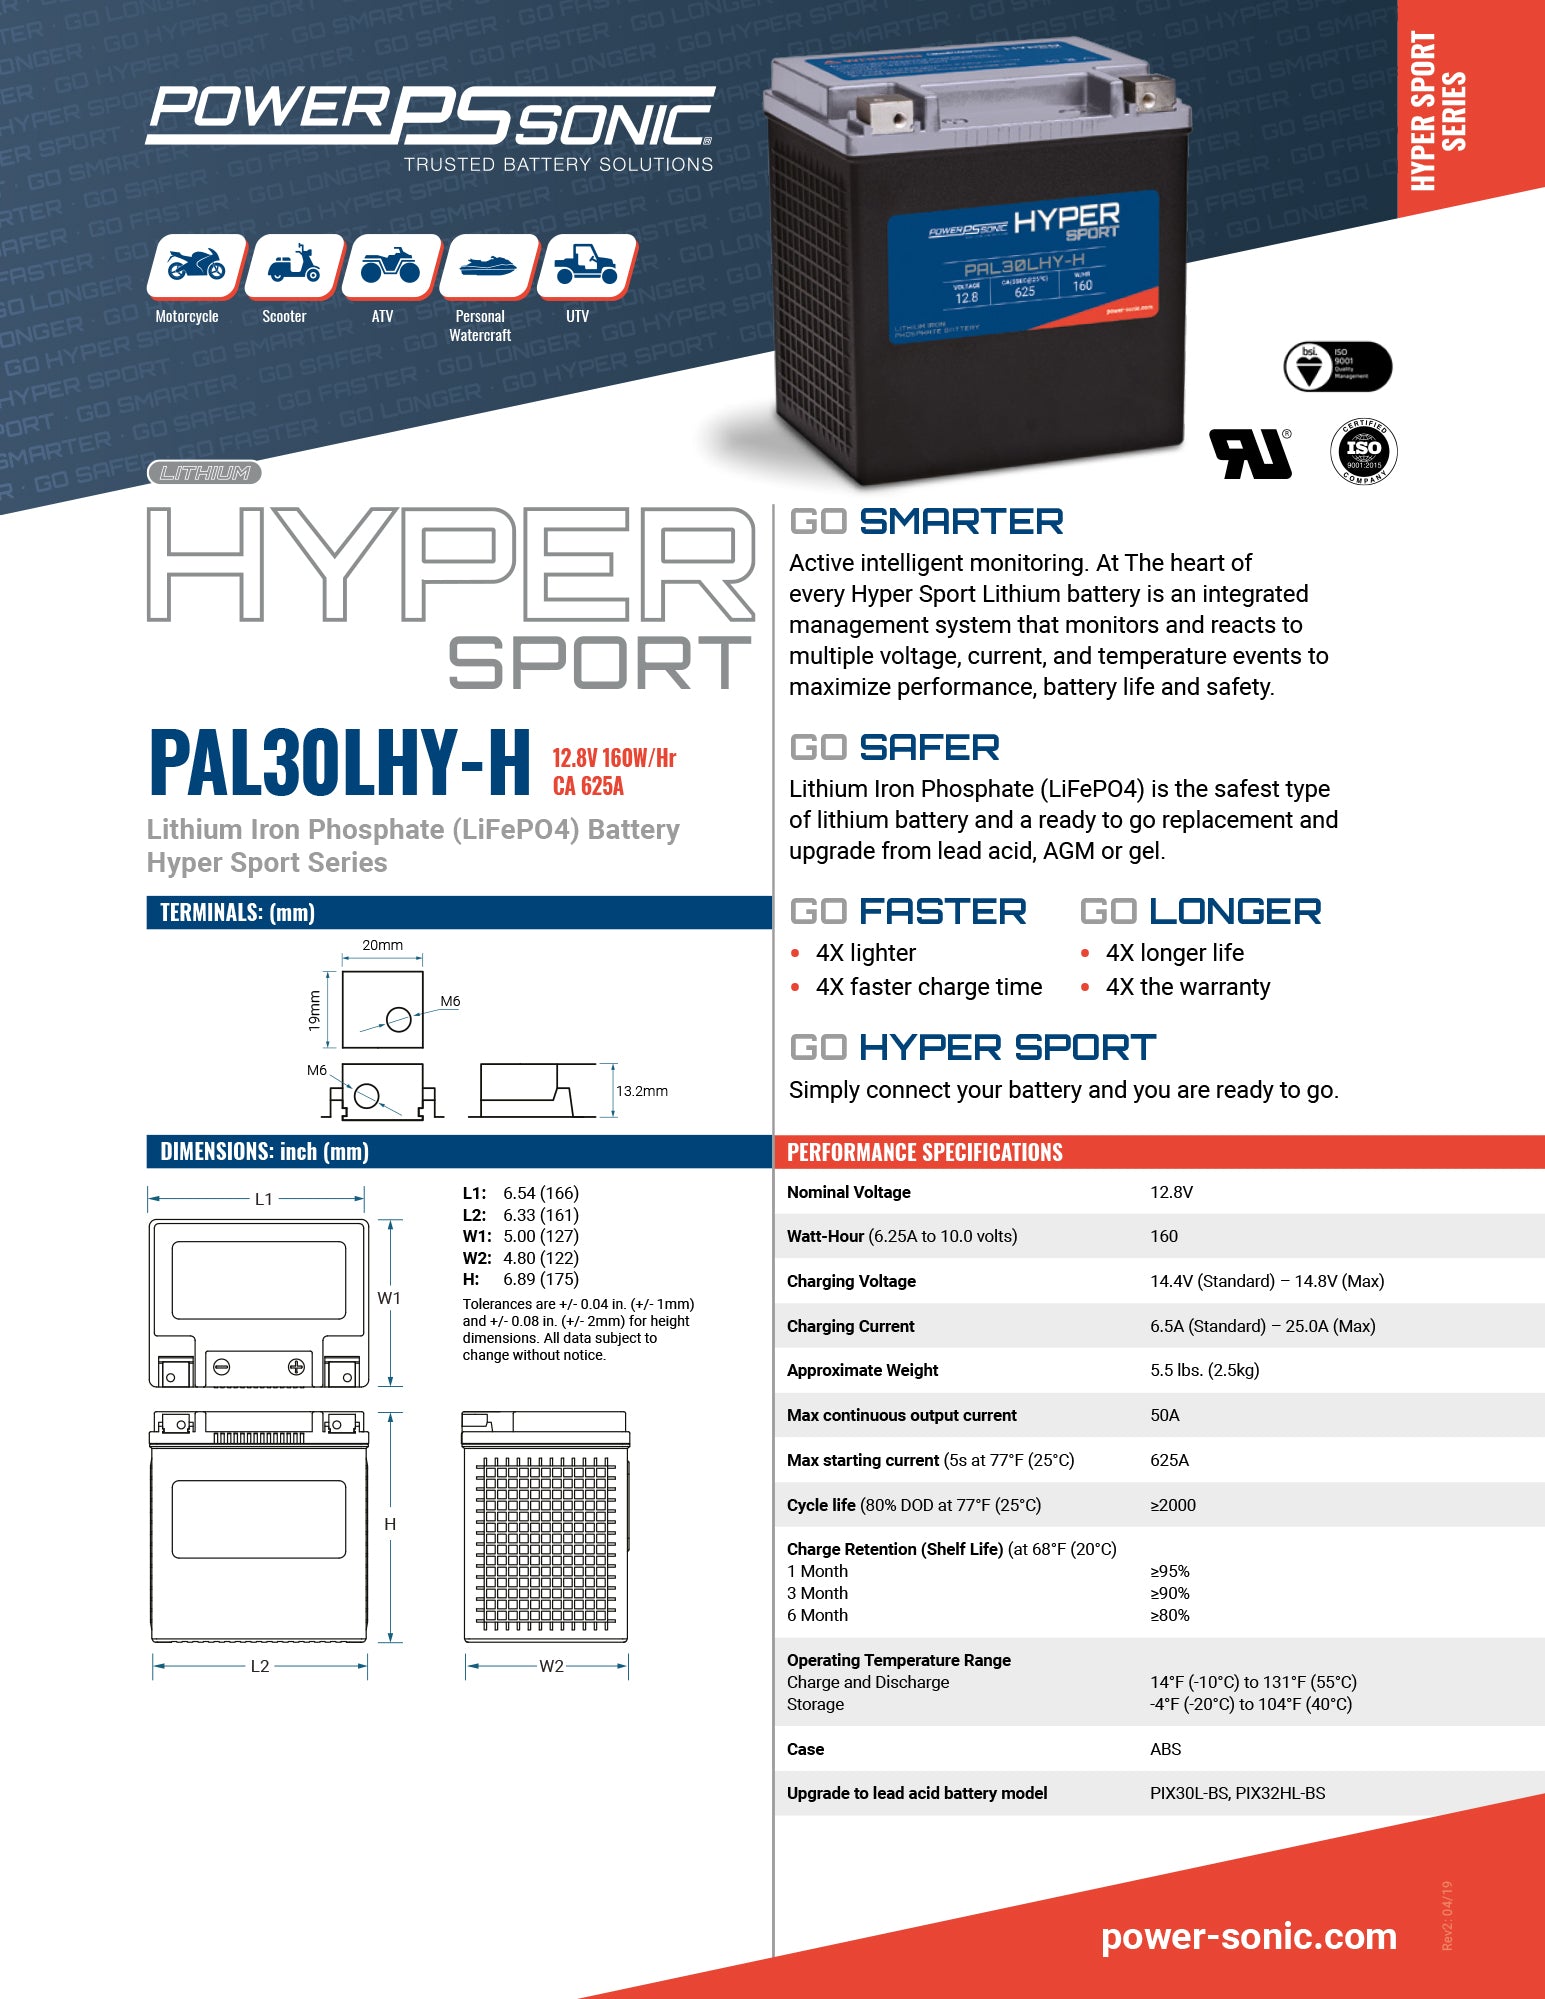 PowerSonic Hyper Sport LiFePO4 Battery PAL30LHY-H - DISCONTINUED, Replaced by PALP-30LHY-H